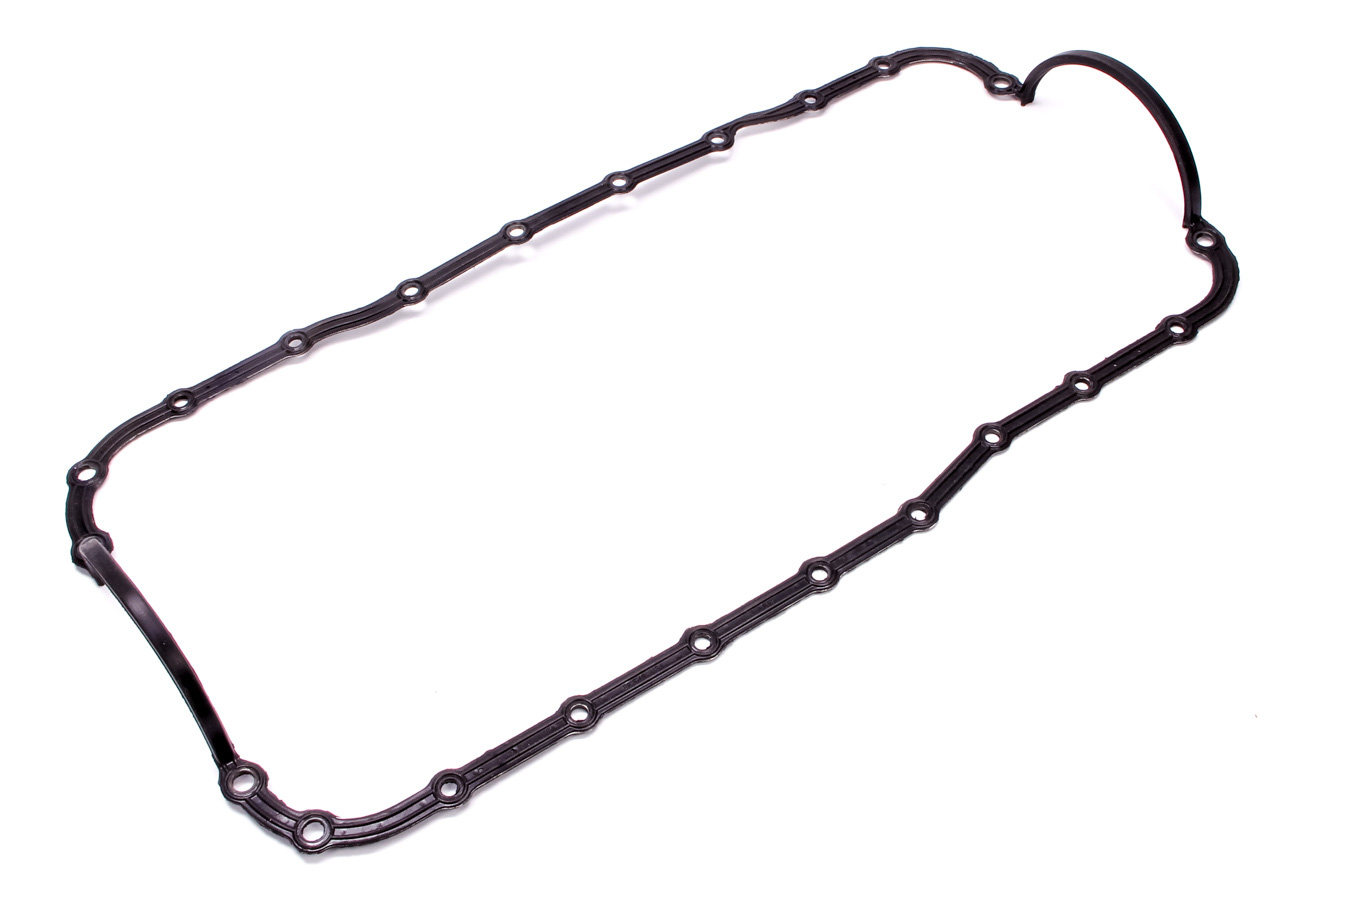 Ford Performance Parts M-6710-A460 Oil Pan Gasket